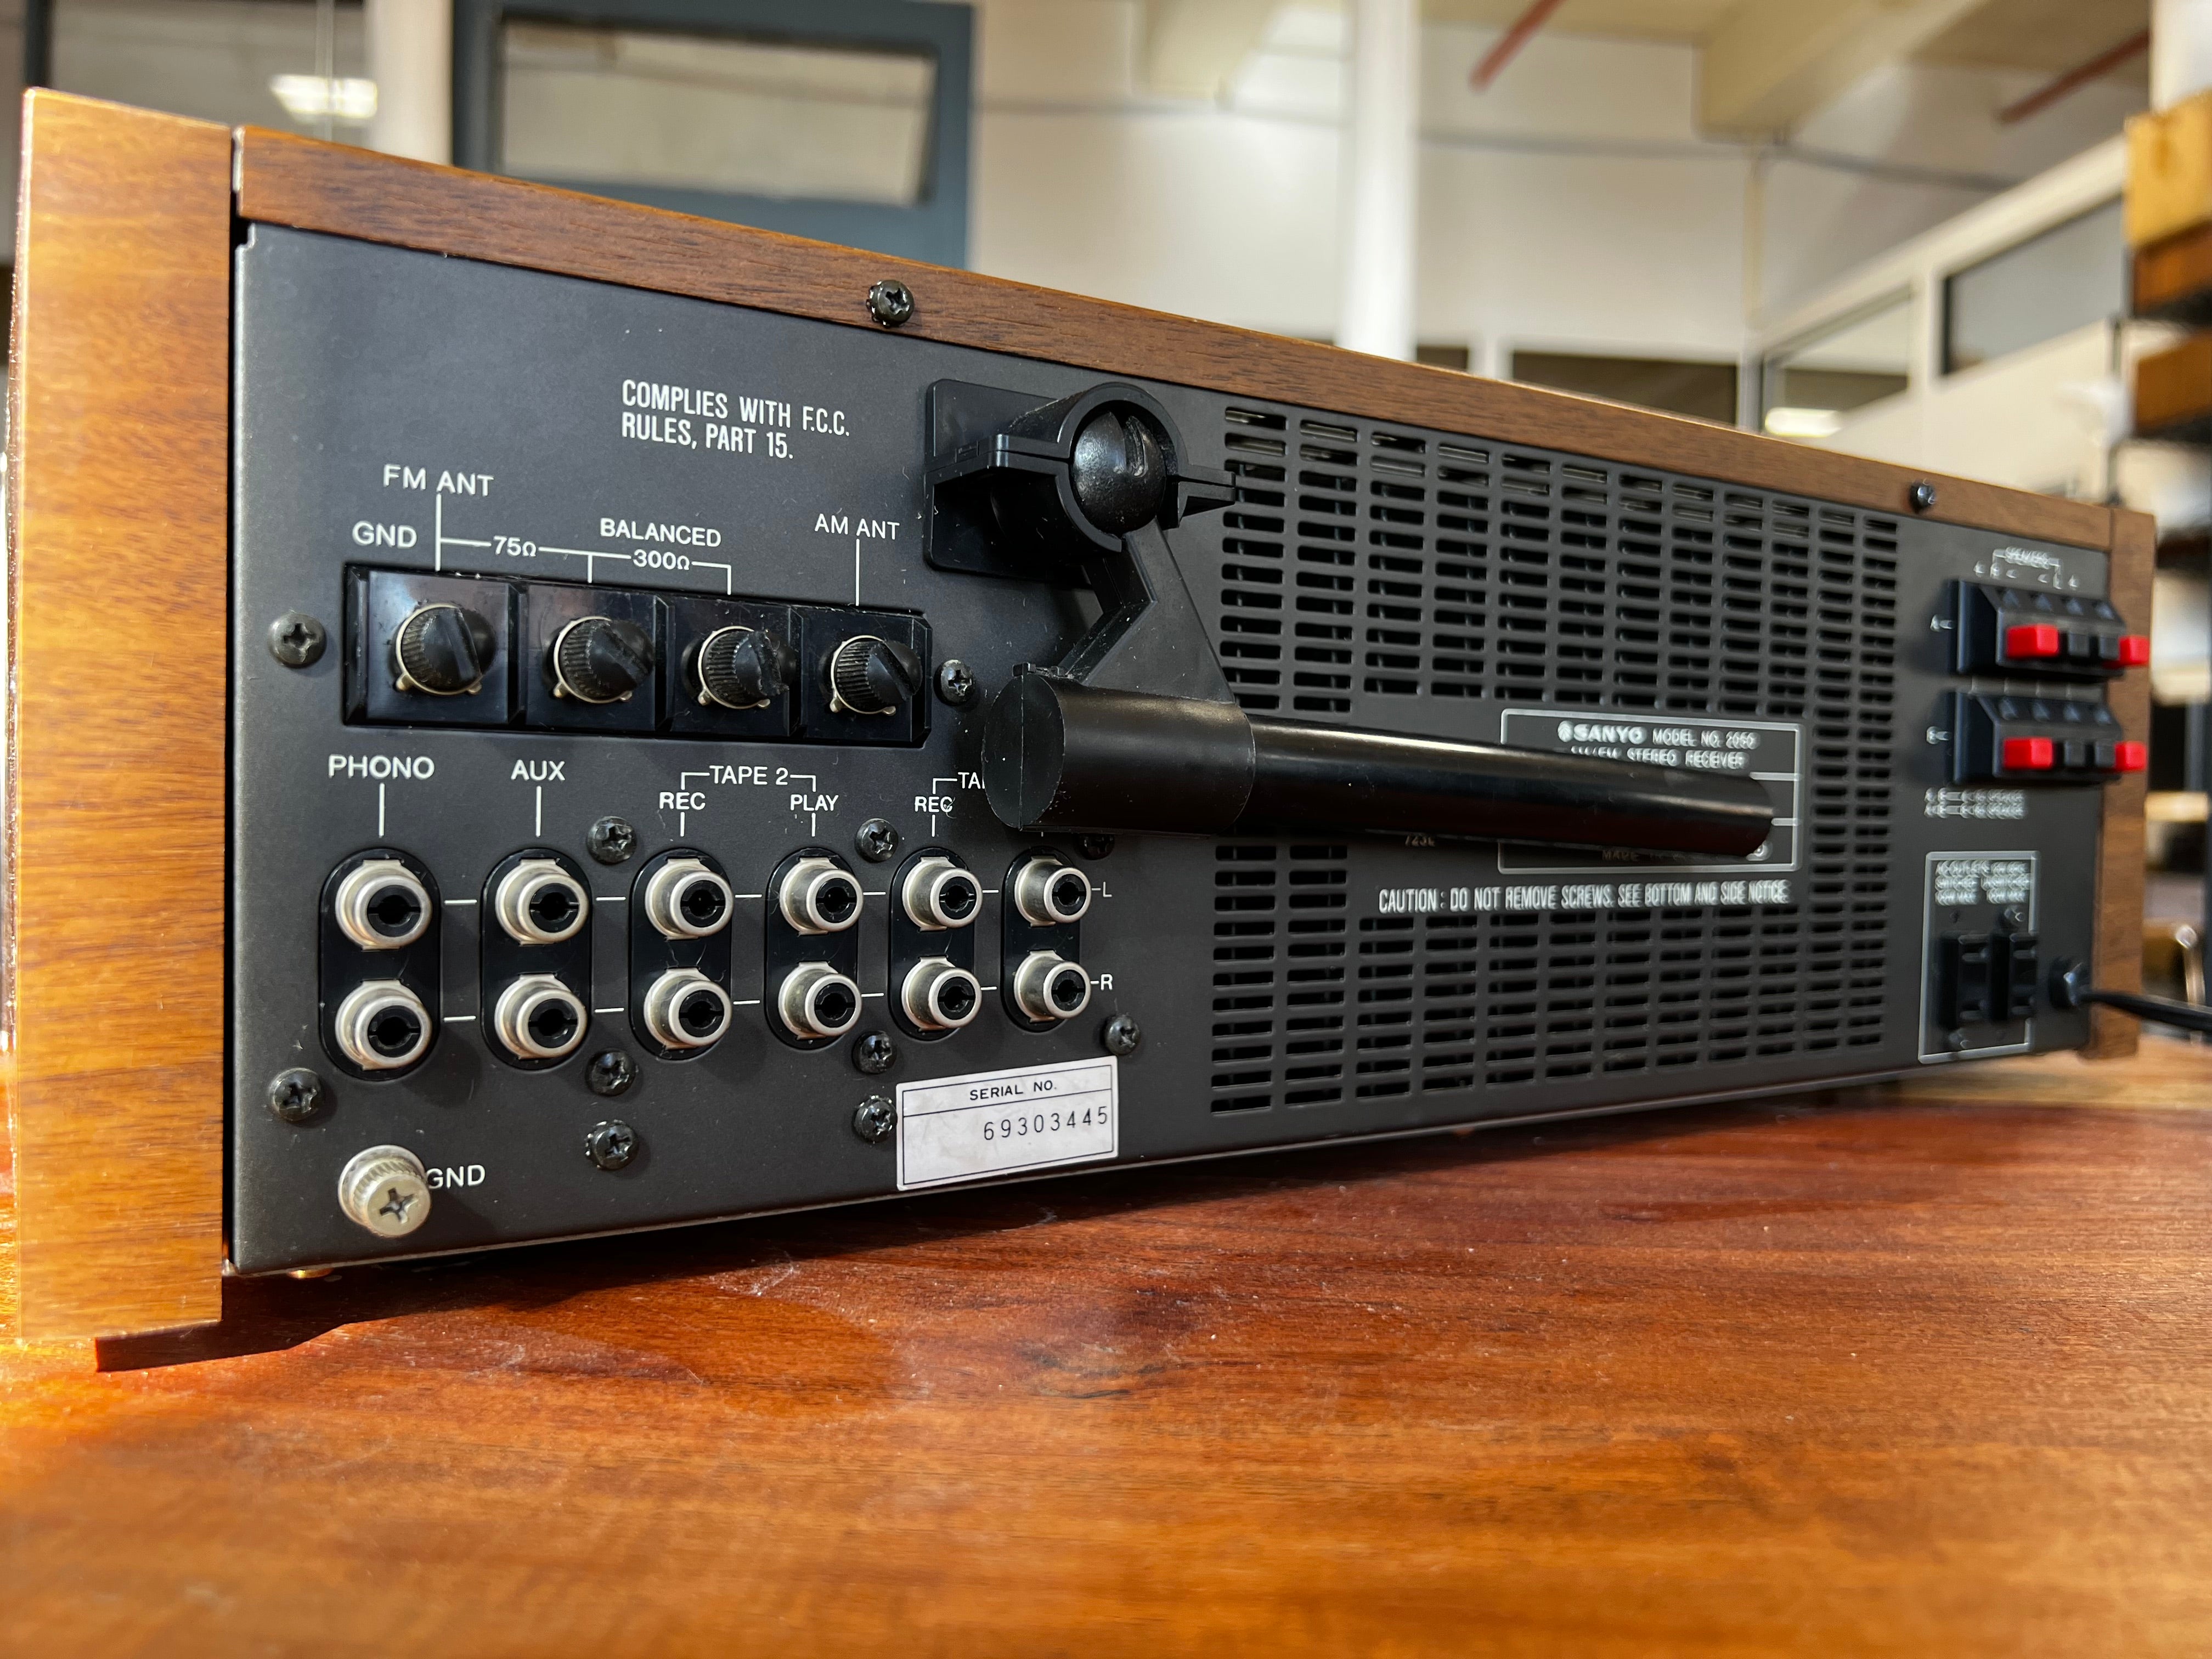 Sanyo 2050 Stereo Receiver, Under-the-Radar Style